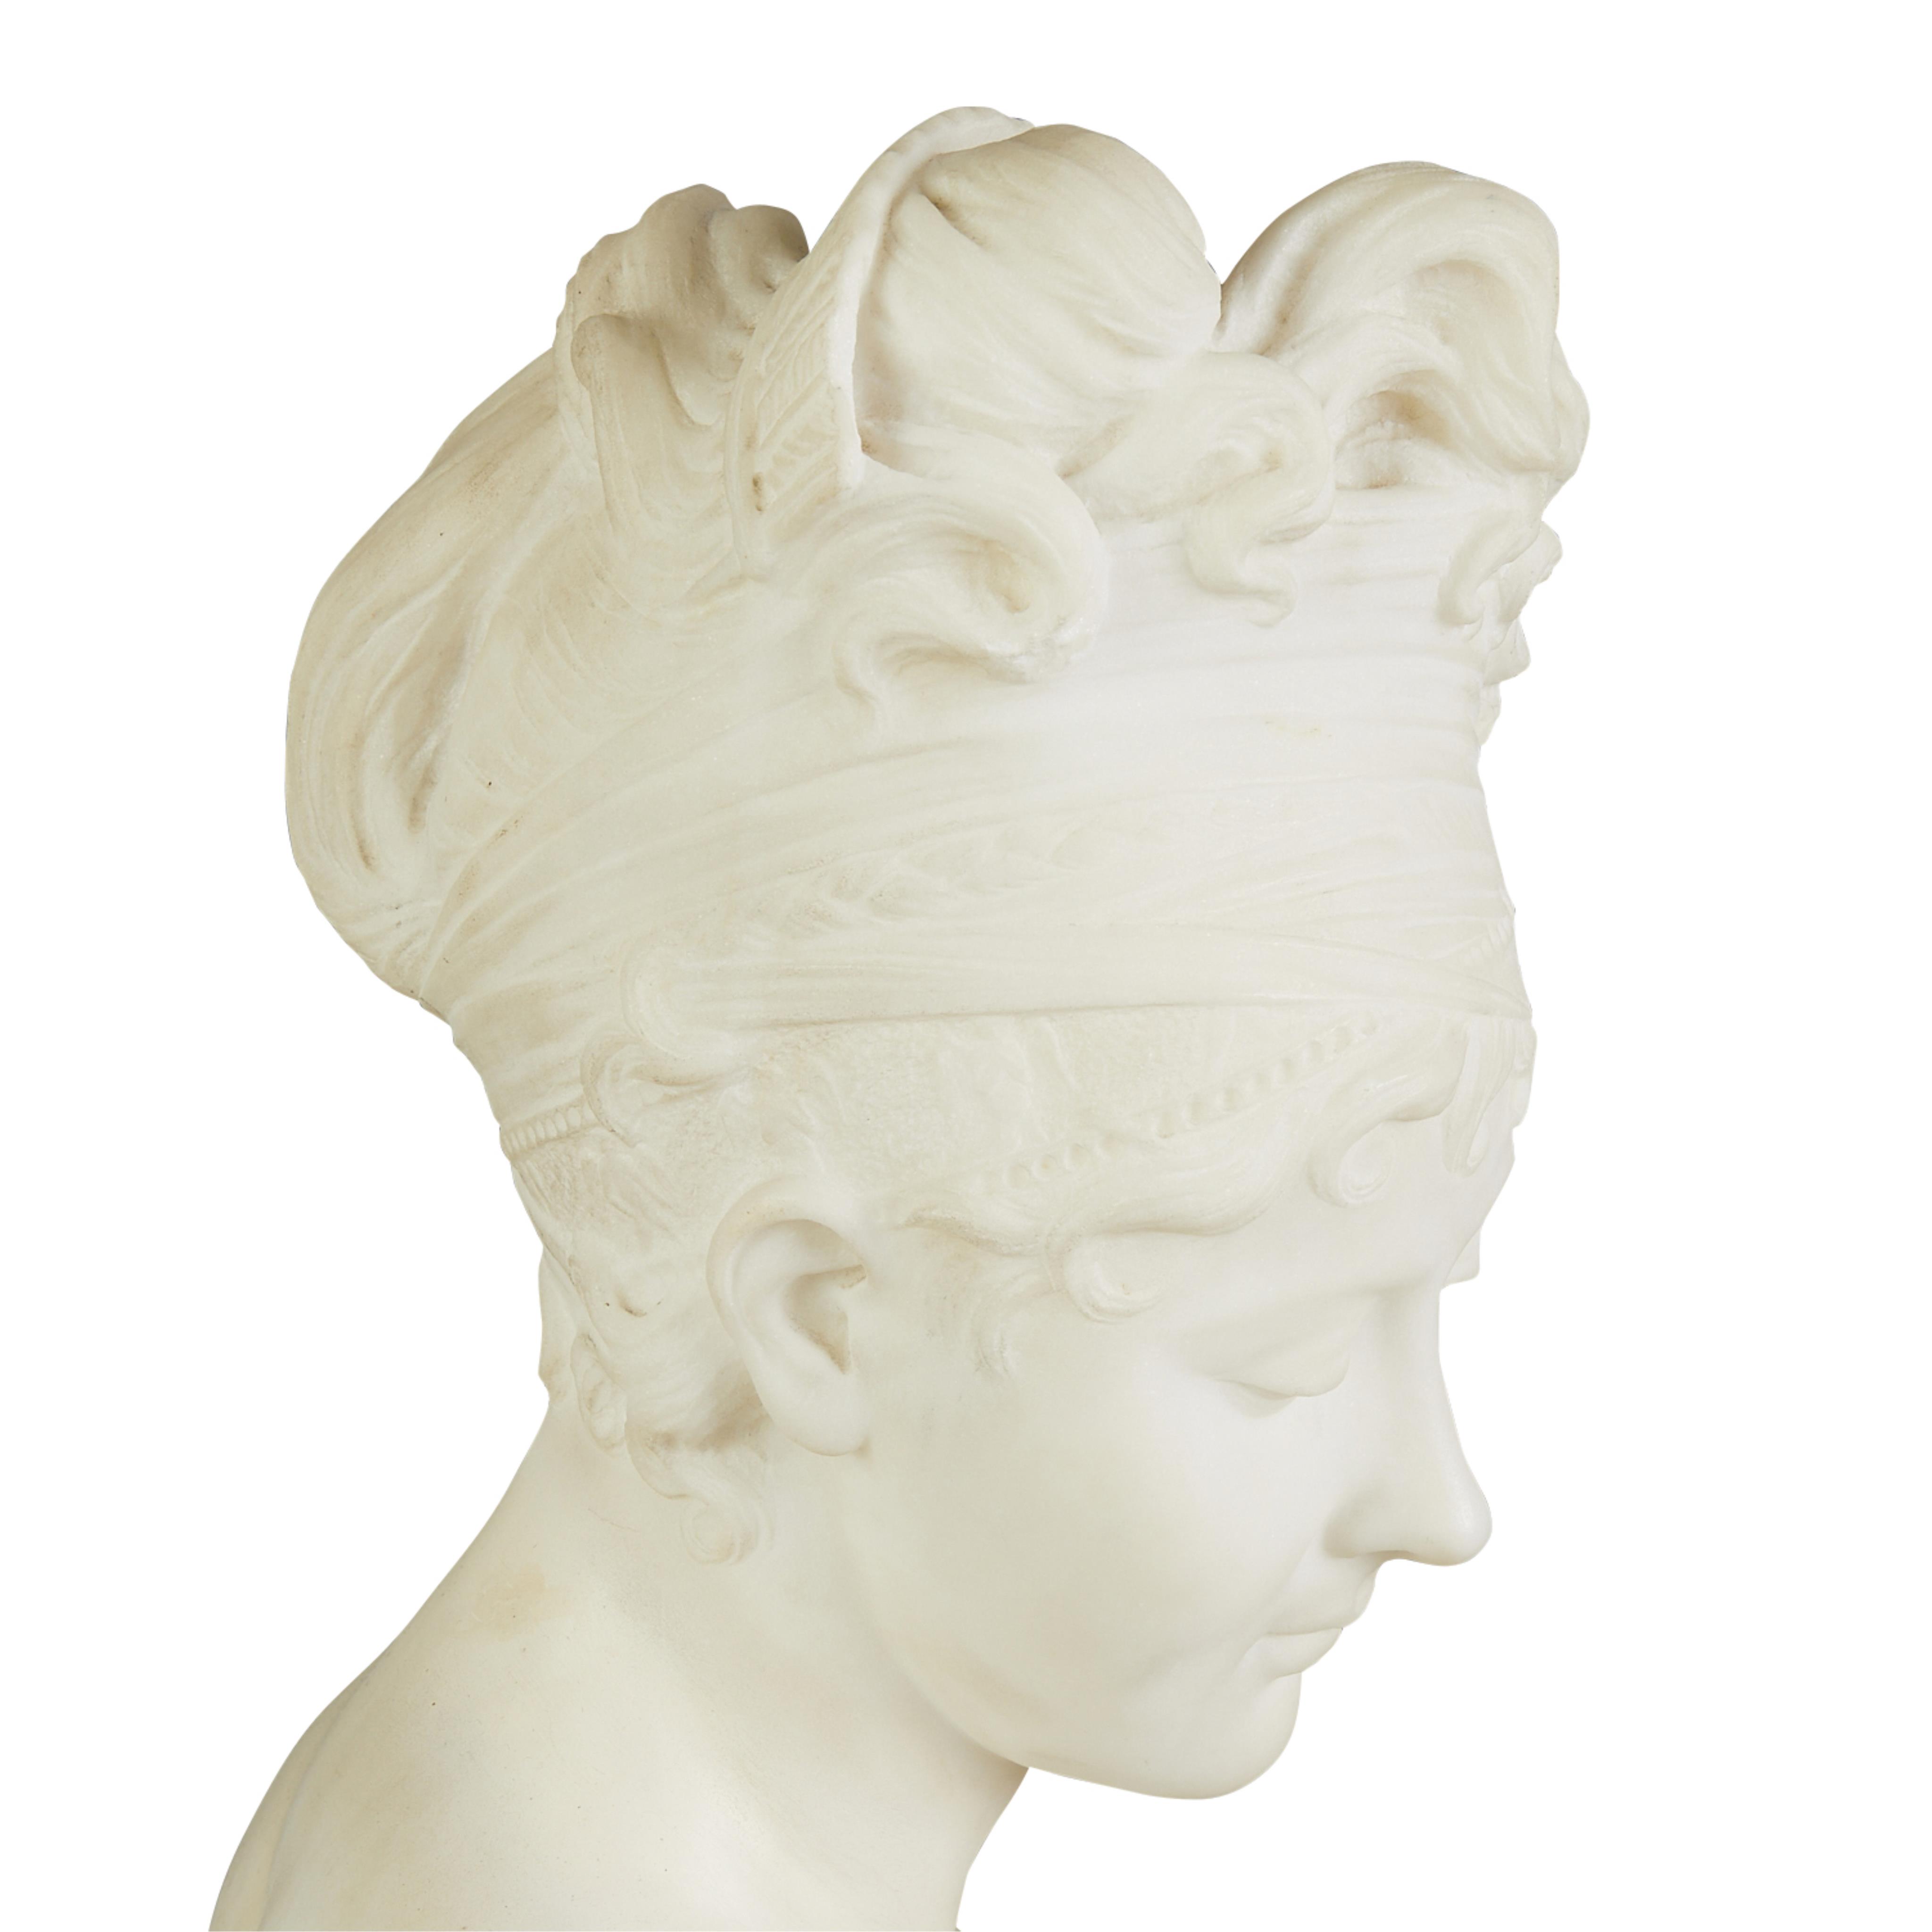 After Joseph Chinard "Madame Recamier" Marble Bust - Image 2 of 9